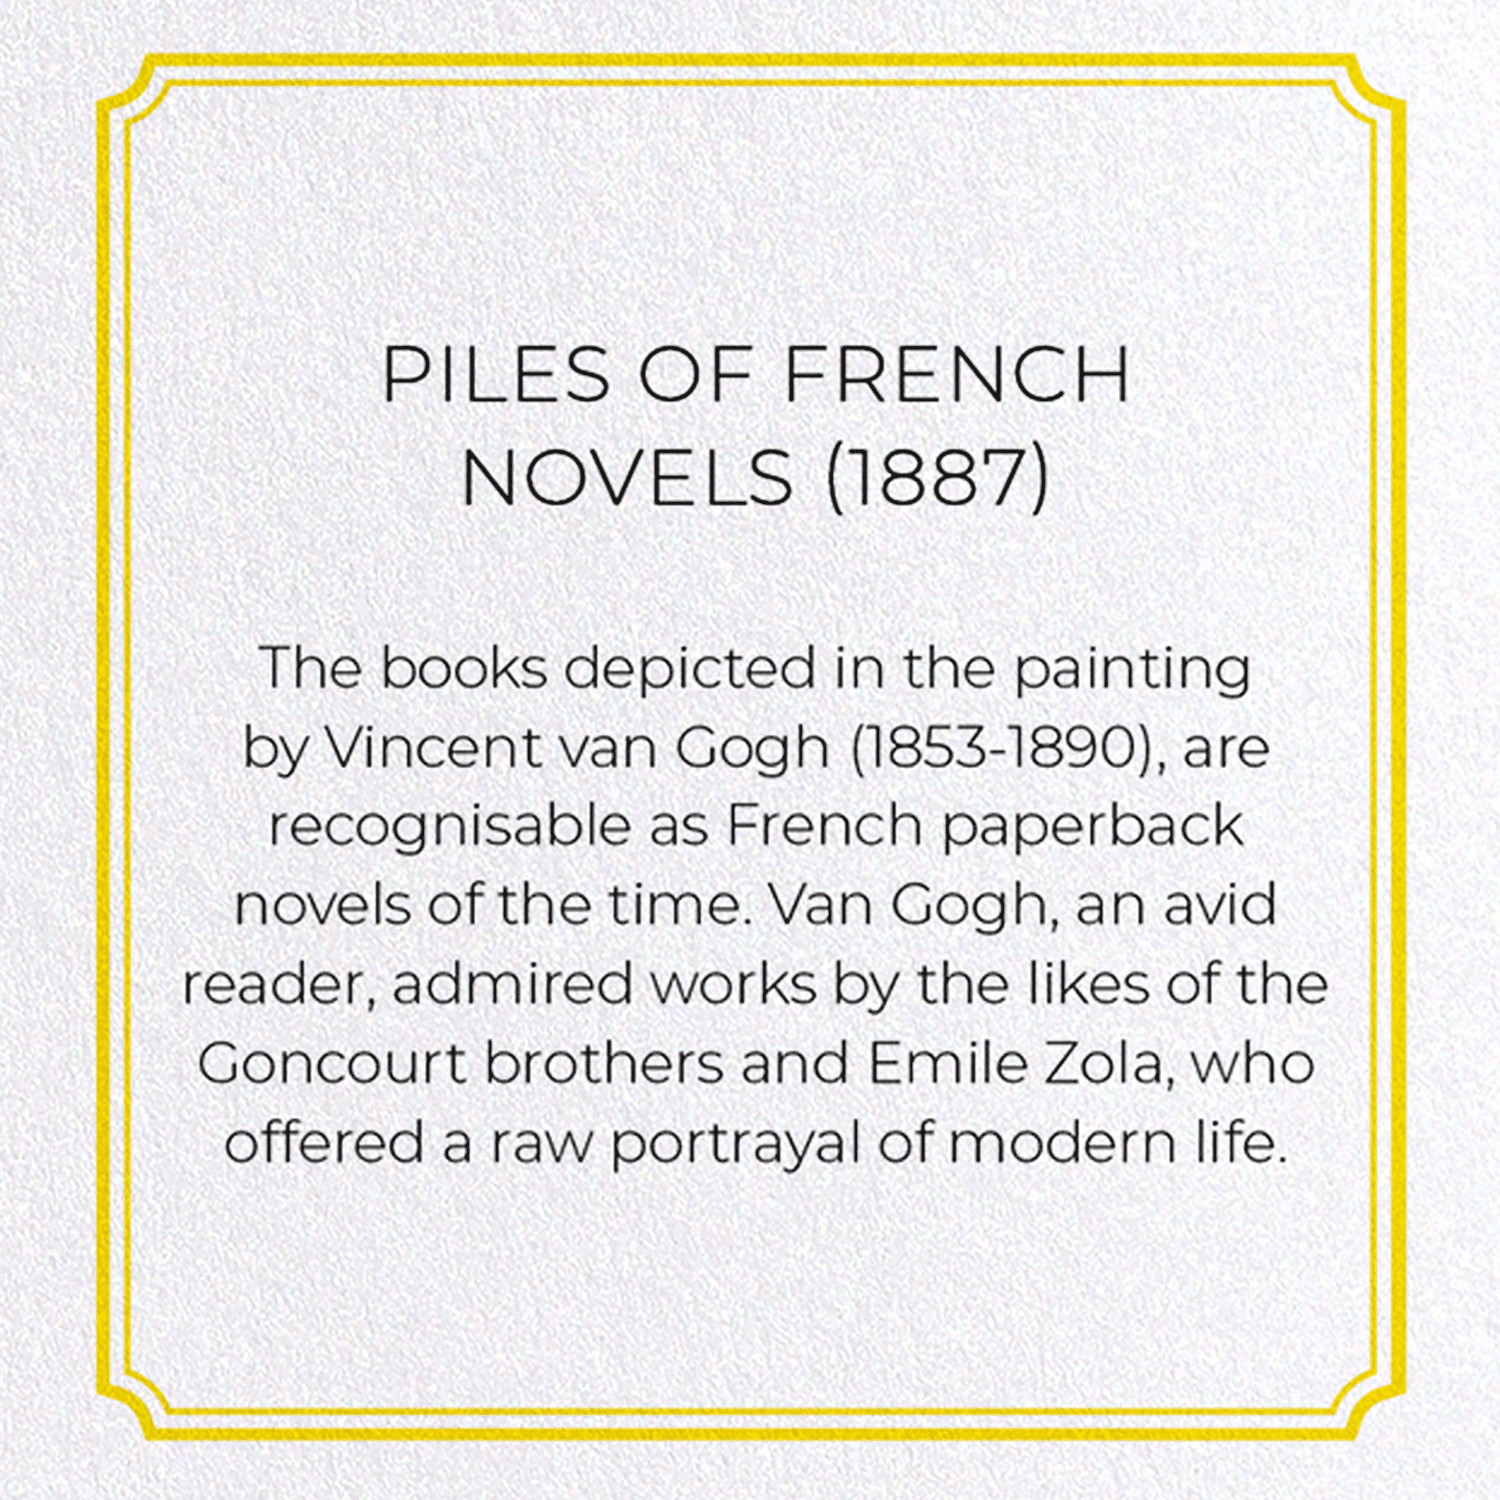 PILES OF FRENCH NOVELS (1887)